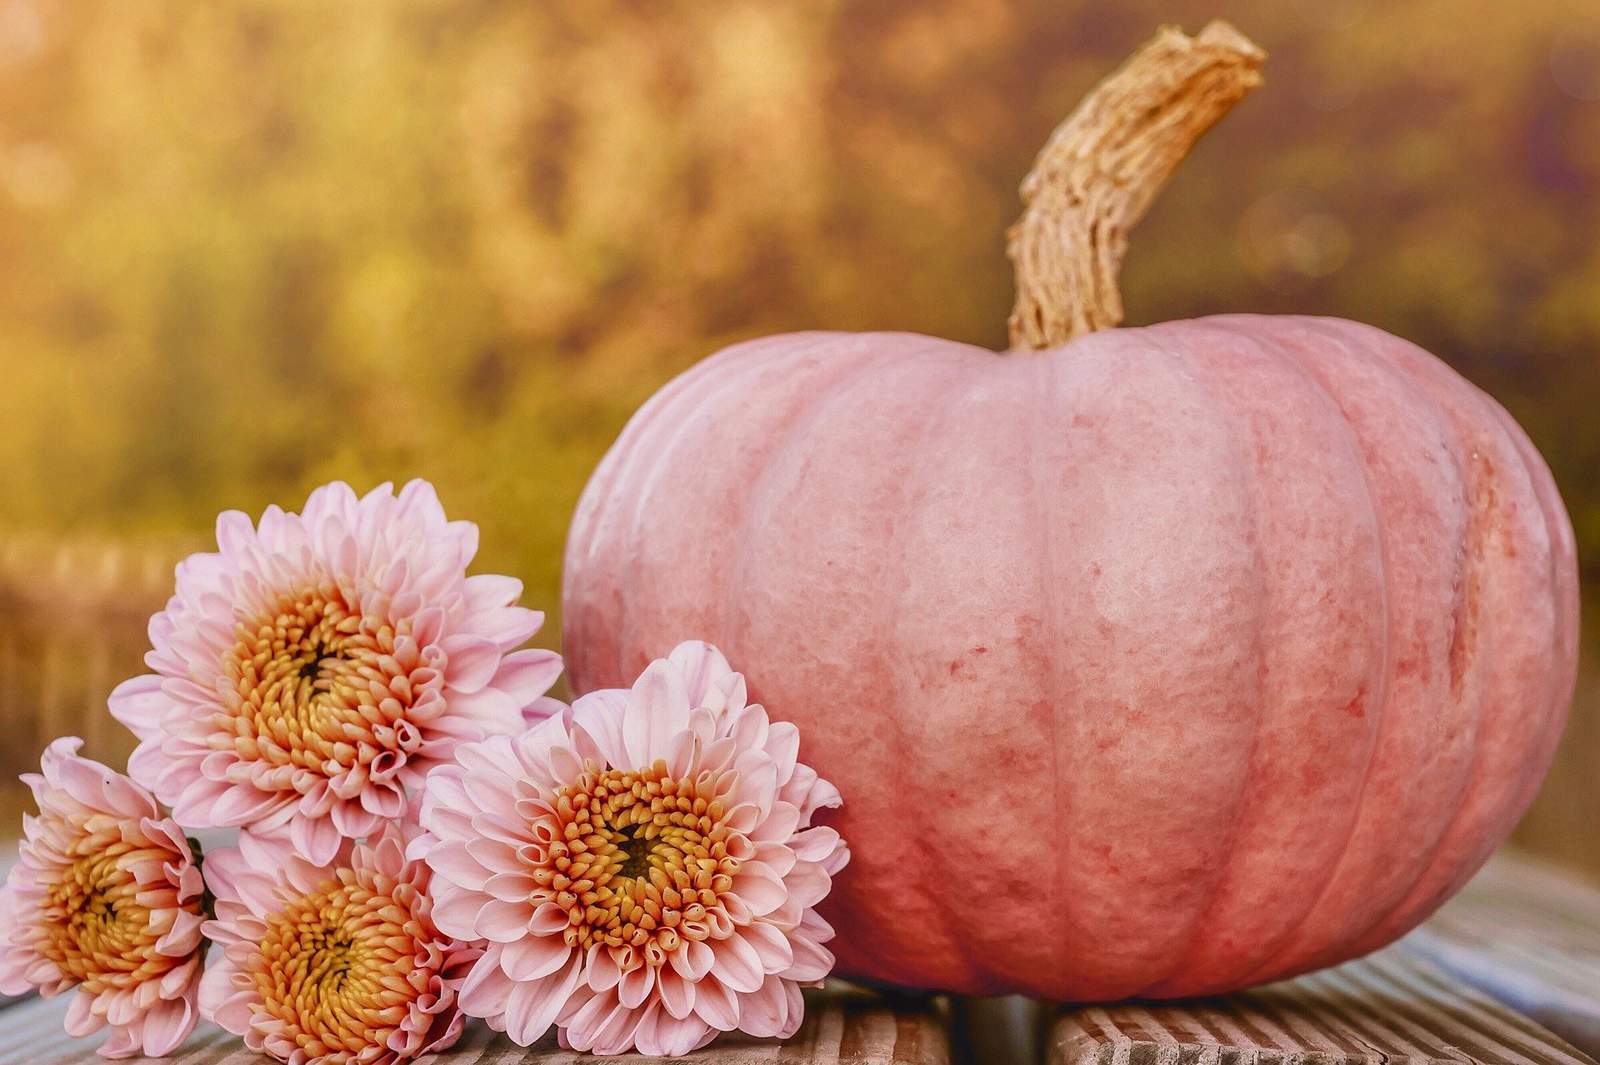 This pink pumpkin patch in Texas is the ultimate detsination for a girls’ getaway this fall